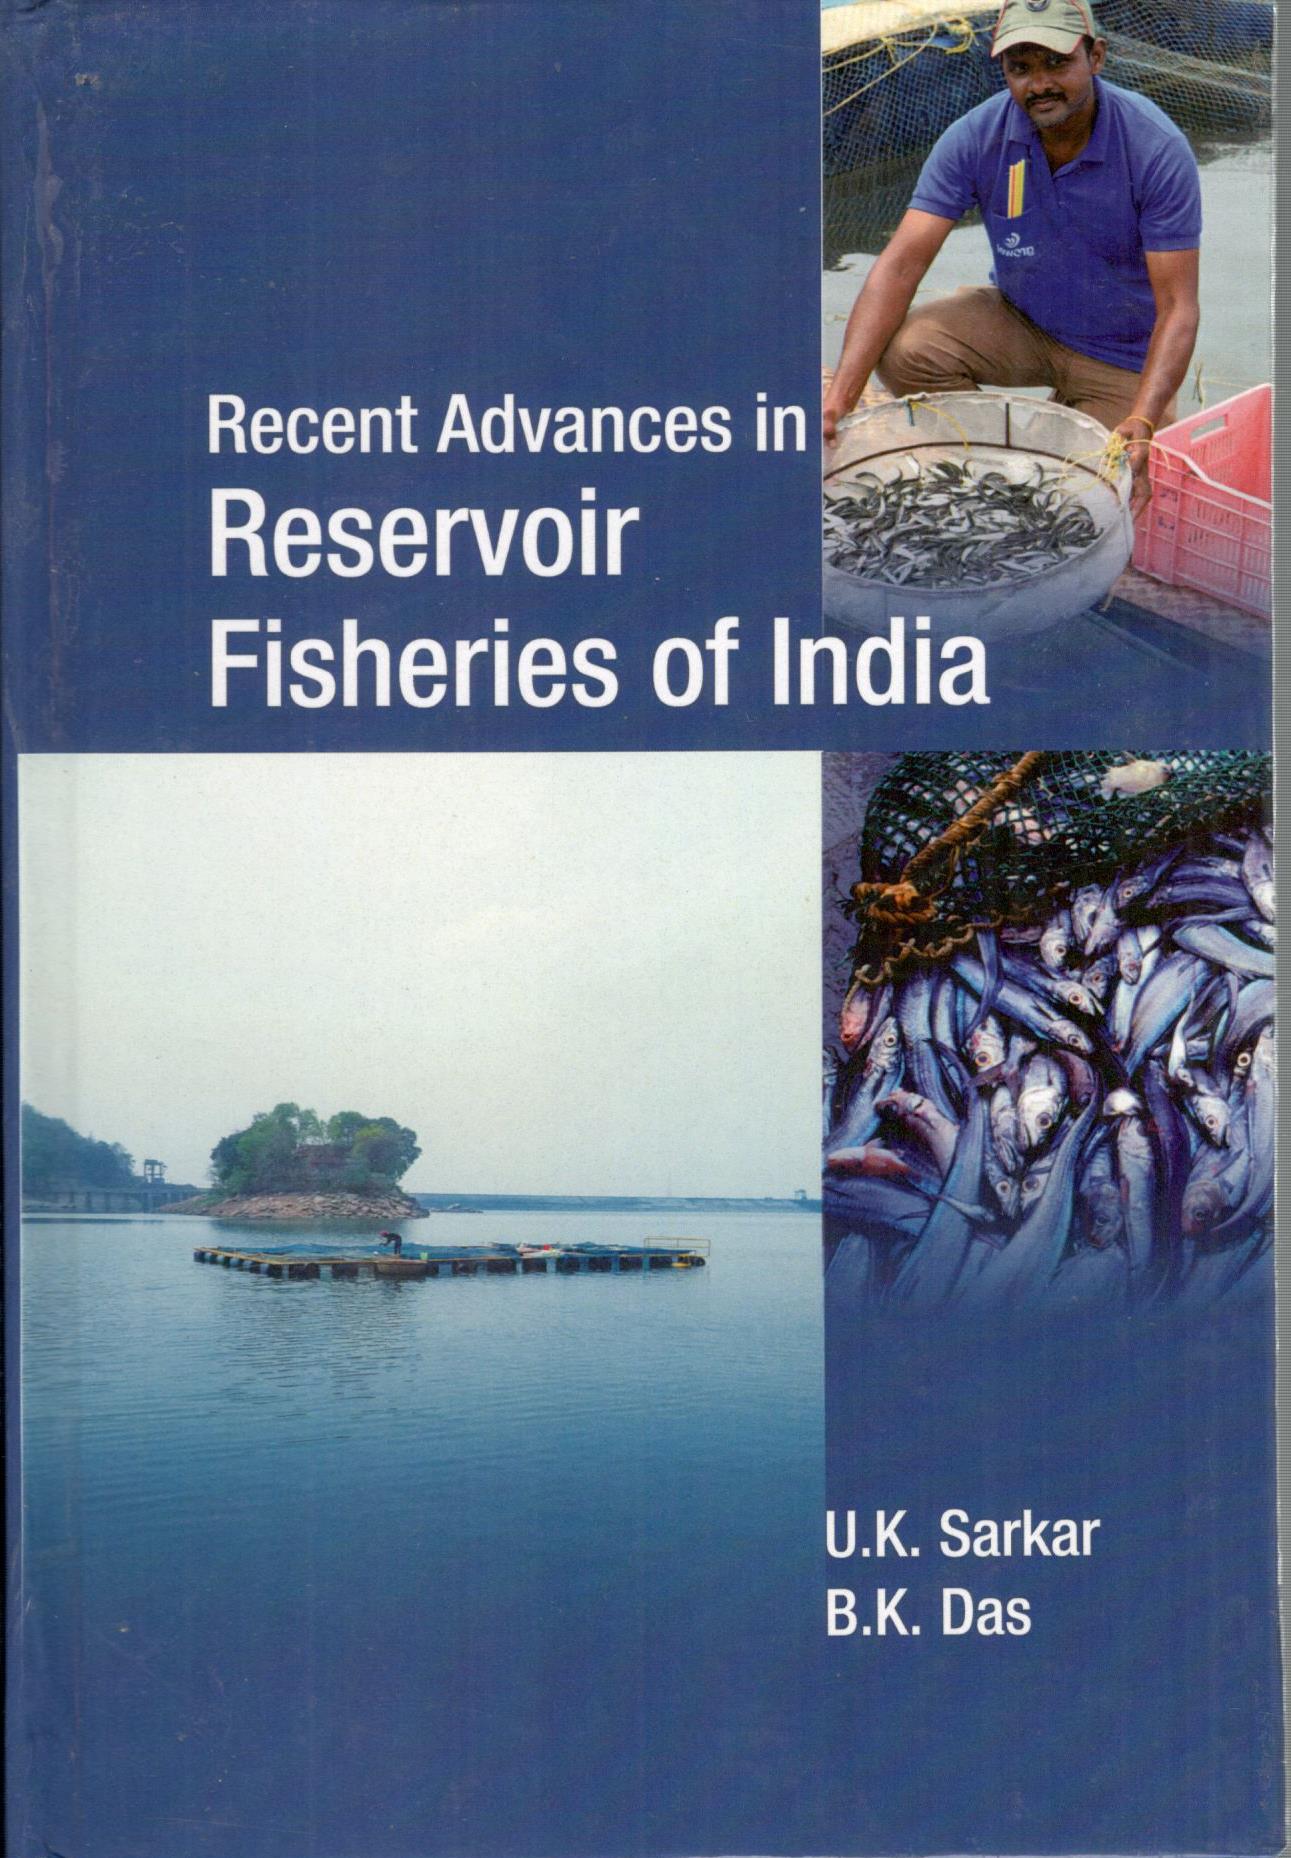 Recent Advances in Reservoir Fisheries of India